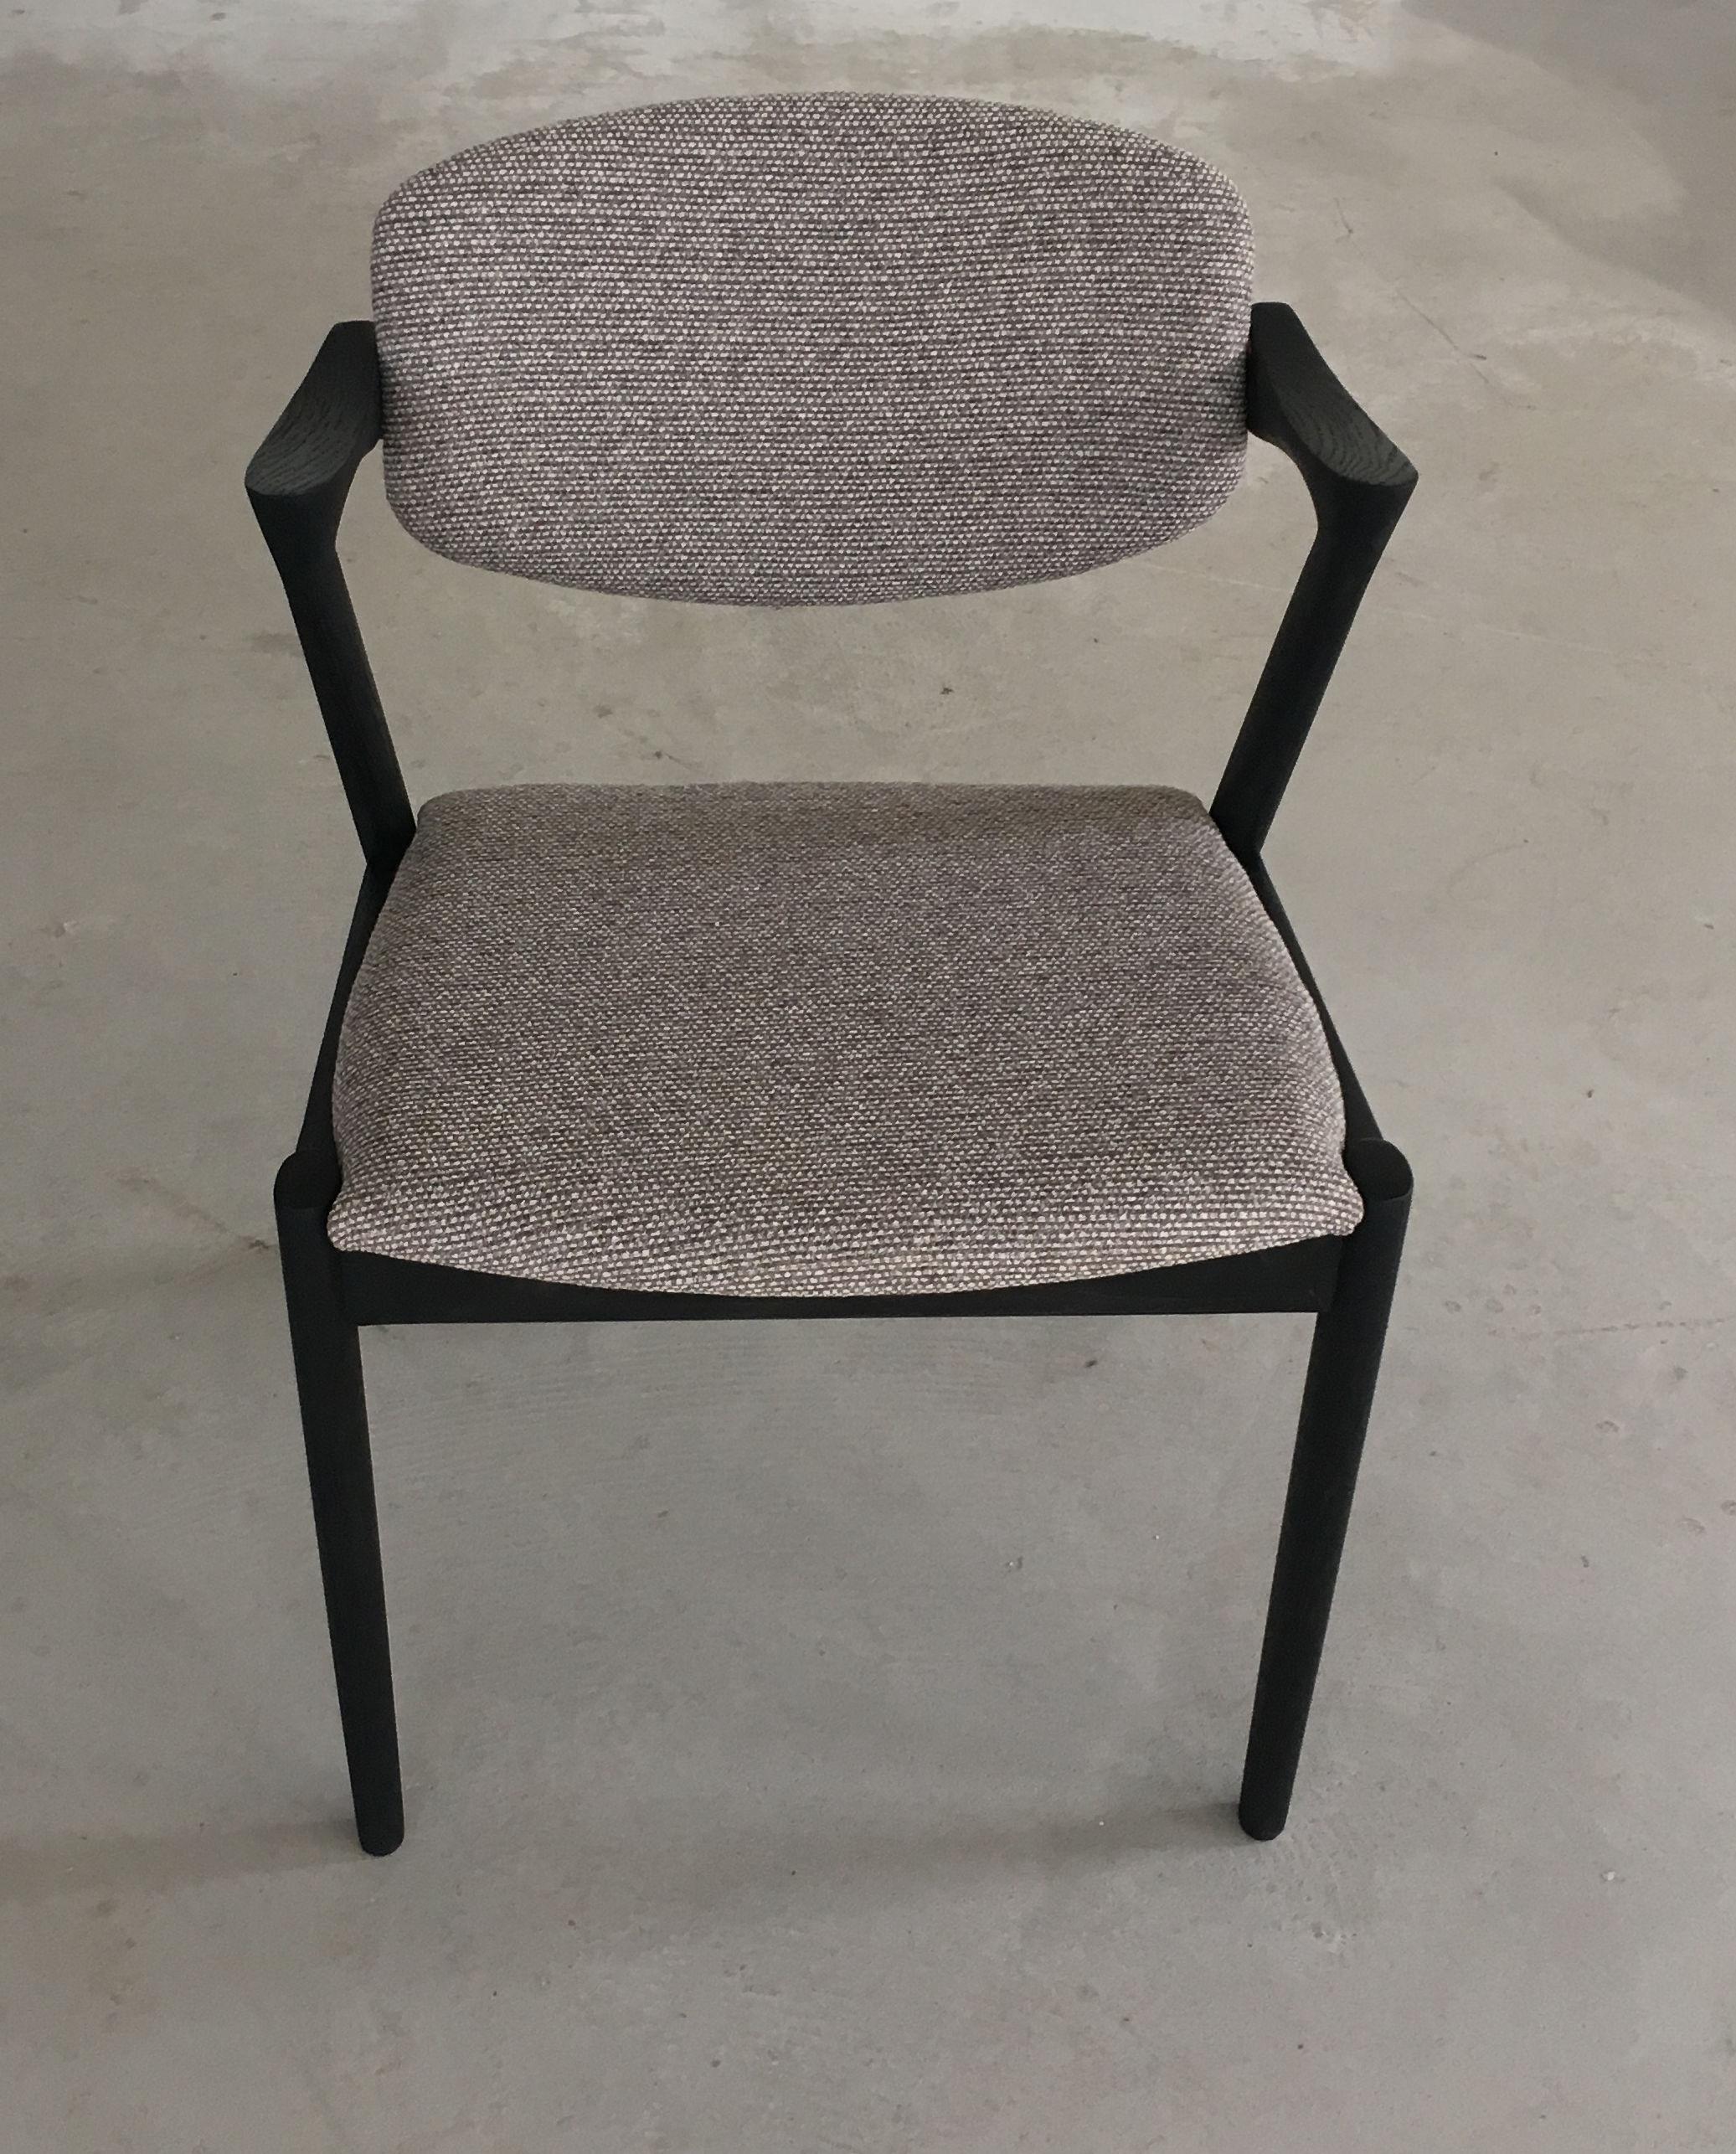 Set of 6 restored and ebonized oak dining chairs, inc. re-upholstery with swivel backrest by Kai Kristiansen for Schous Møbelfabrik.

The chairs have Kai Kristiansen’s typical light and elegant design that make them fit in easily where you want them